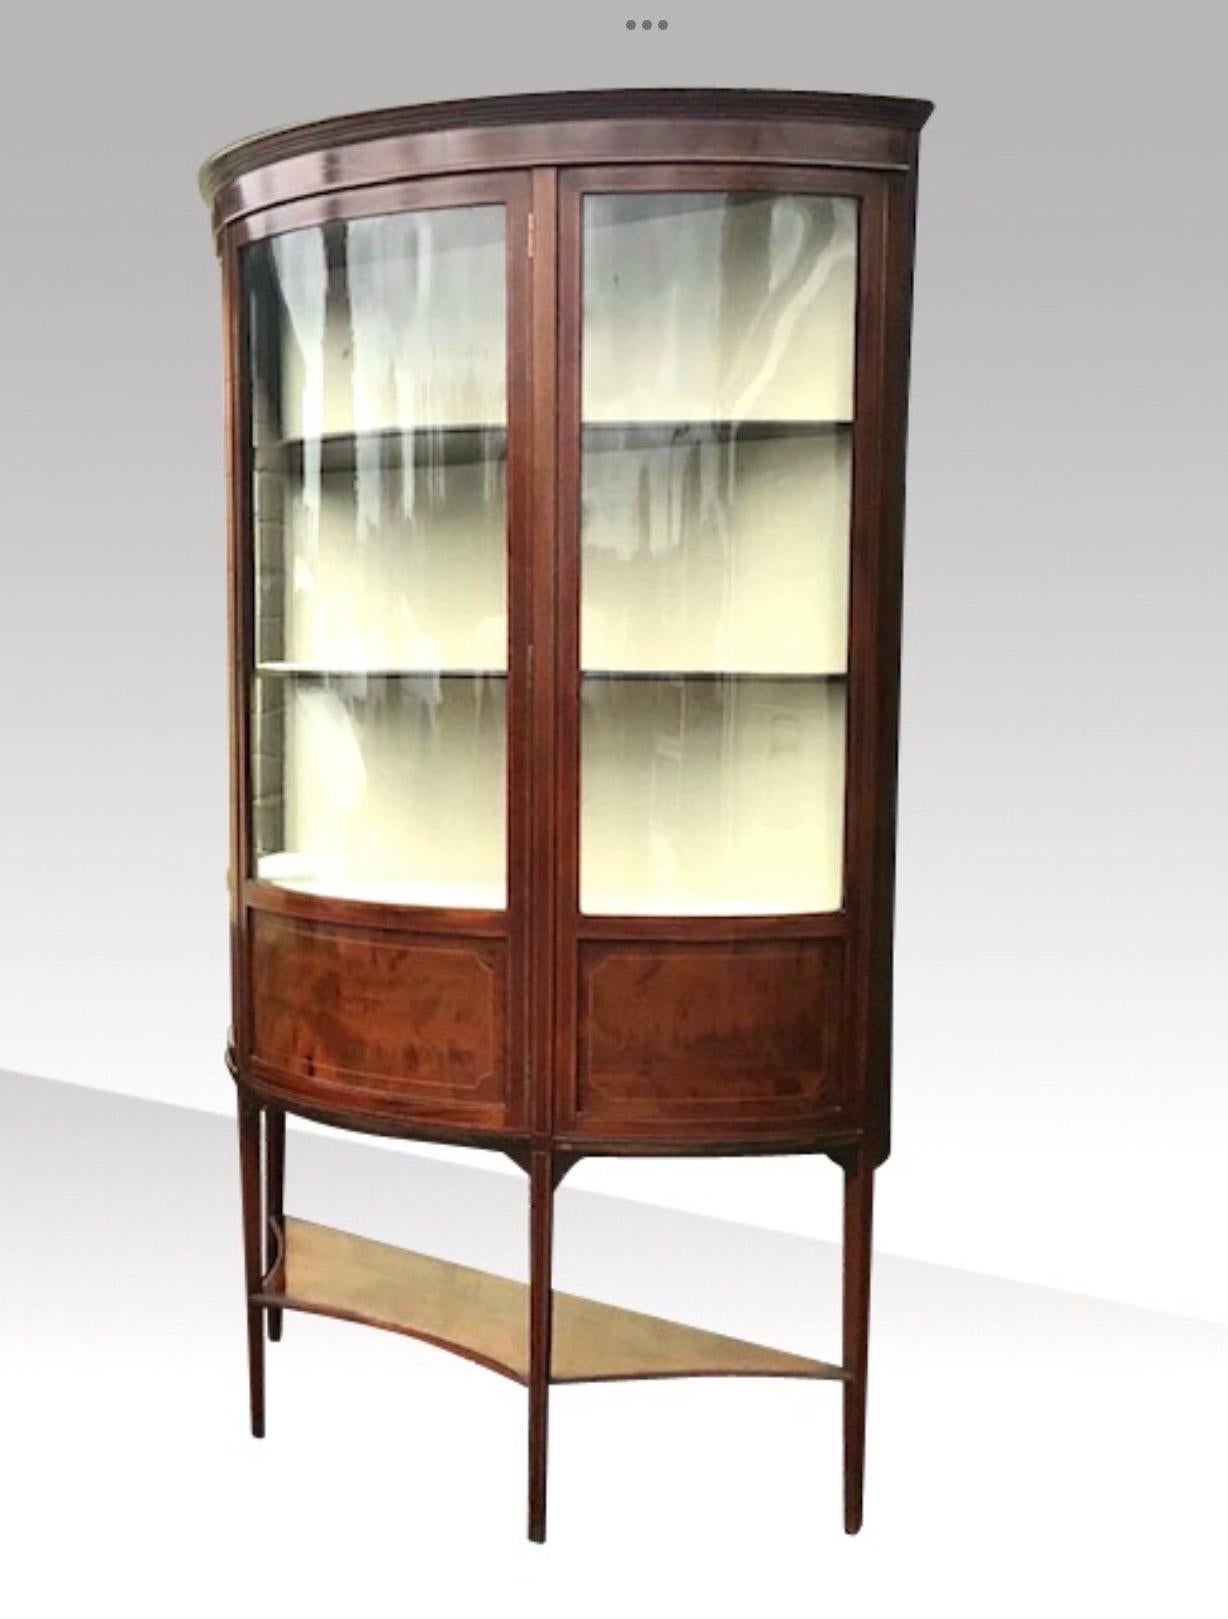 Lovely Bow Fronted Inlaid Mahogany Antique Display Cabinet Vitrine by Maple and Co
c1890
Measures: 72ins x 48ins wide.